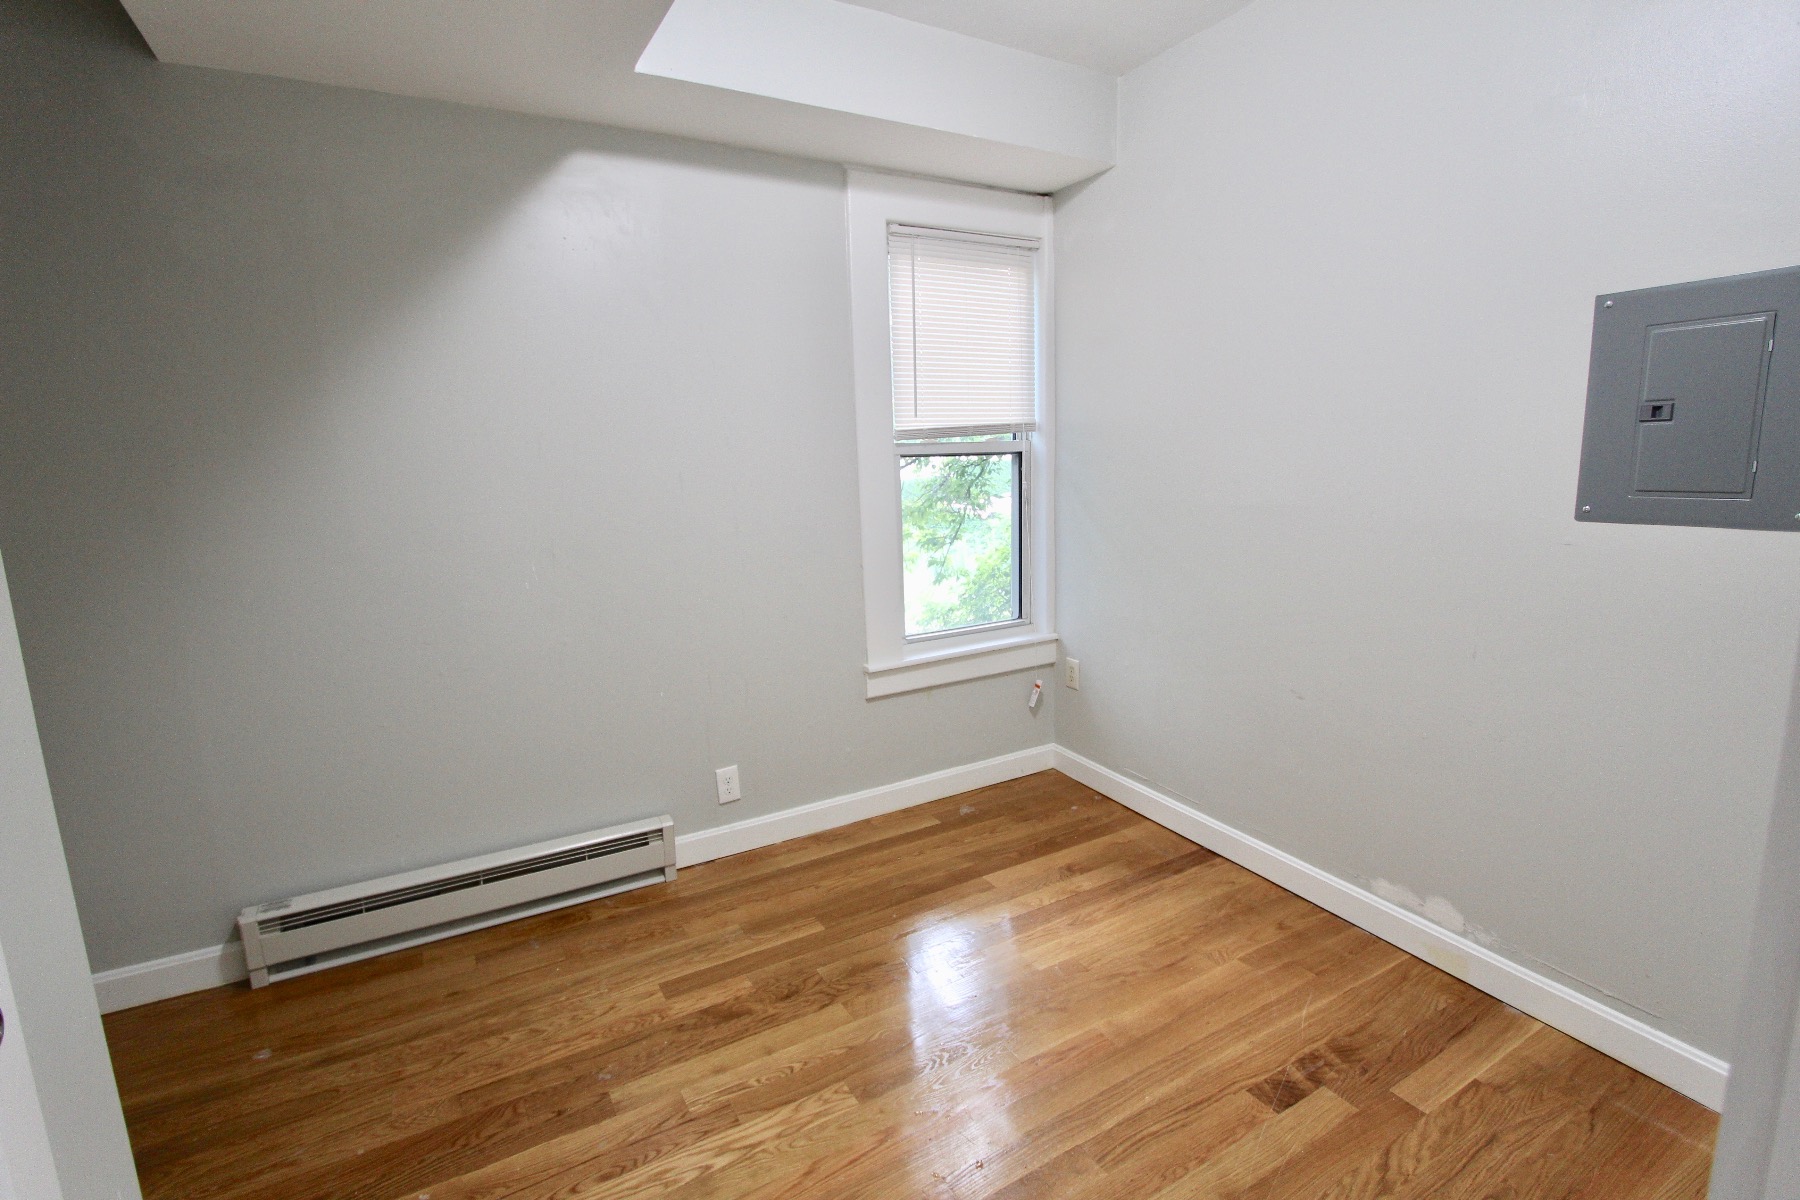 Photos of apartment on East Cottage St.,Boston MA 02125